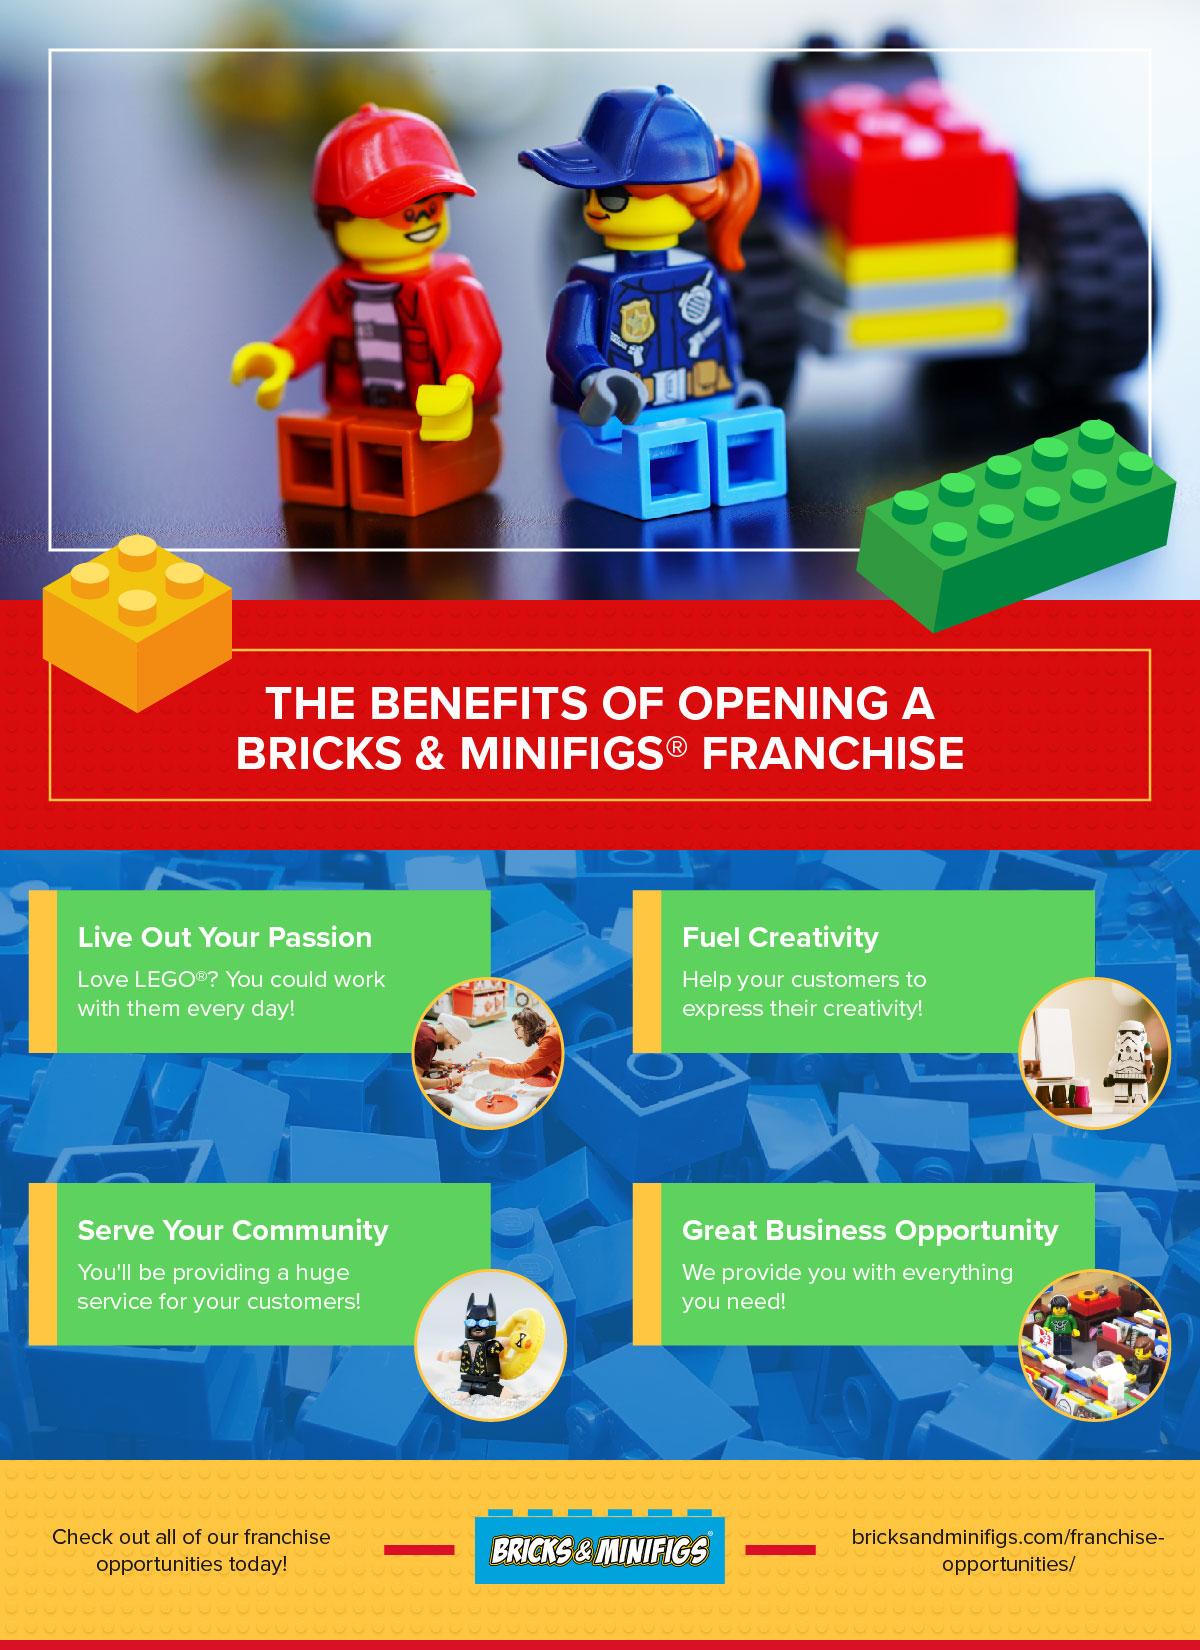 The Benefits of Opening a Bricks & Minifigs Franchise Infographic